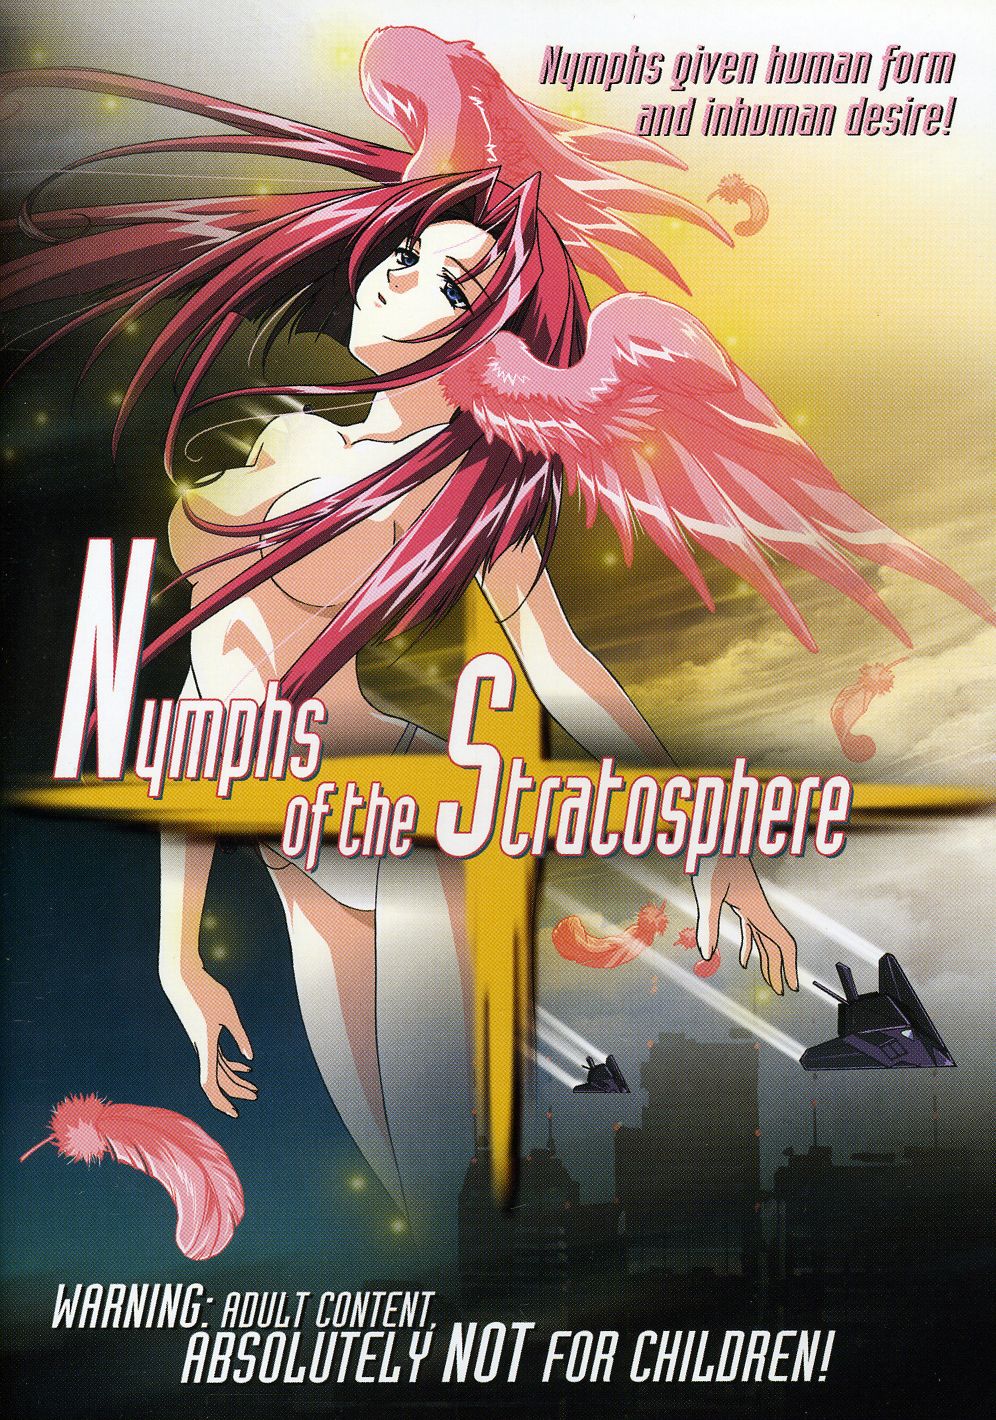 NYMPHS OF THE STATOSPHERE (ADULT) / (DUB SUB)